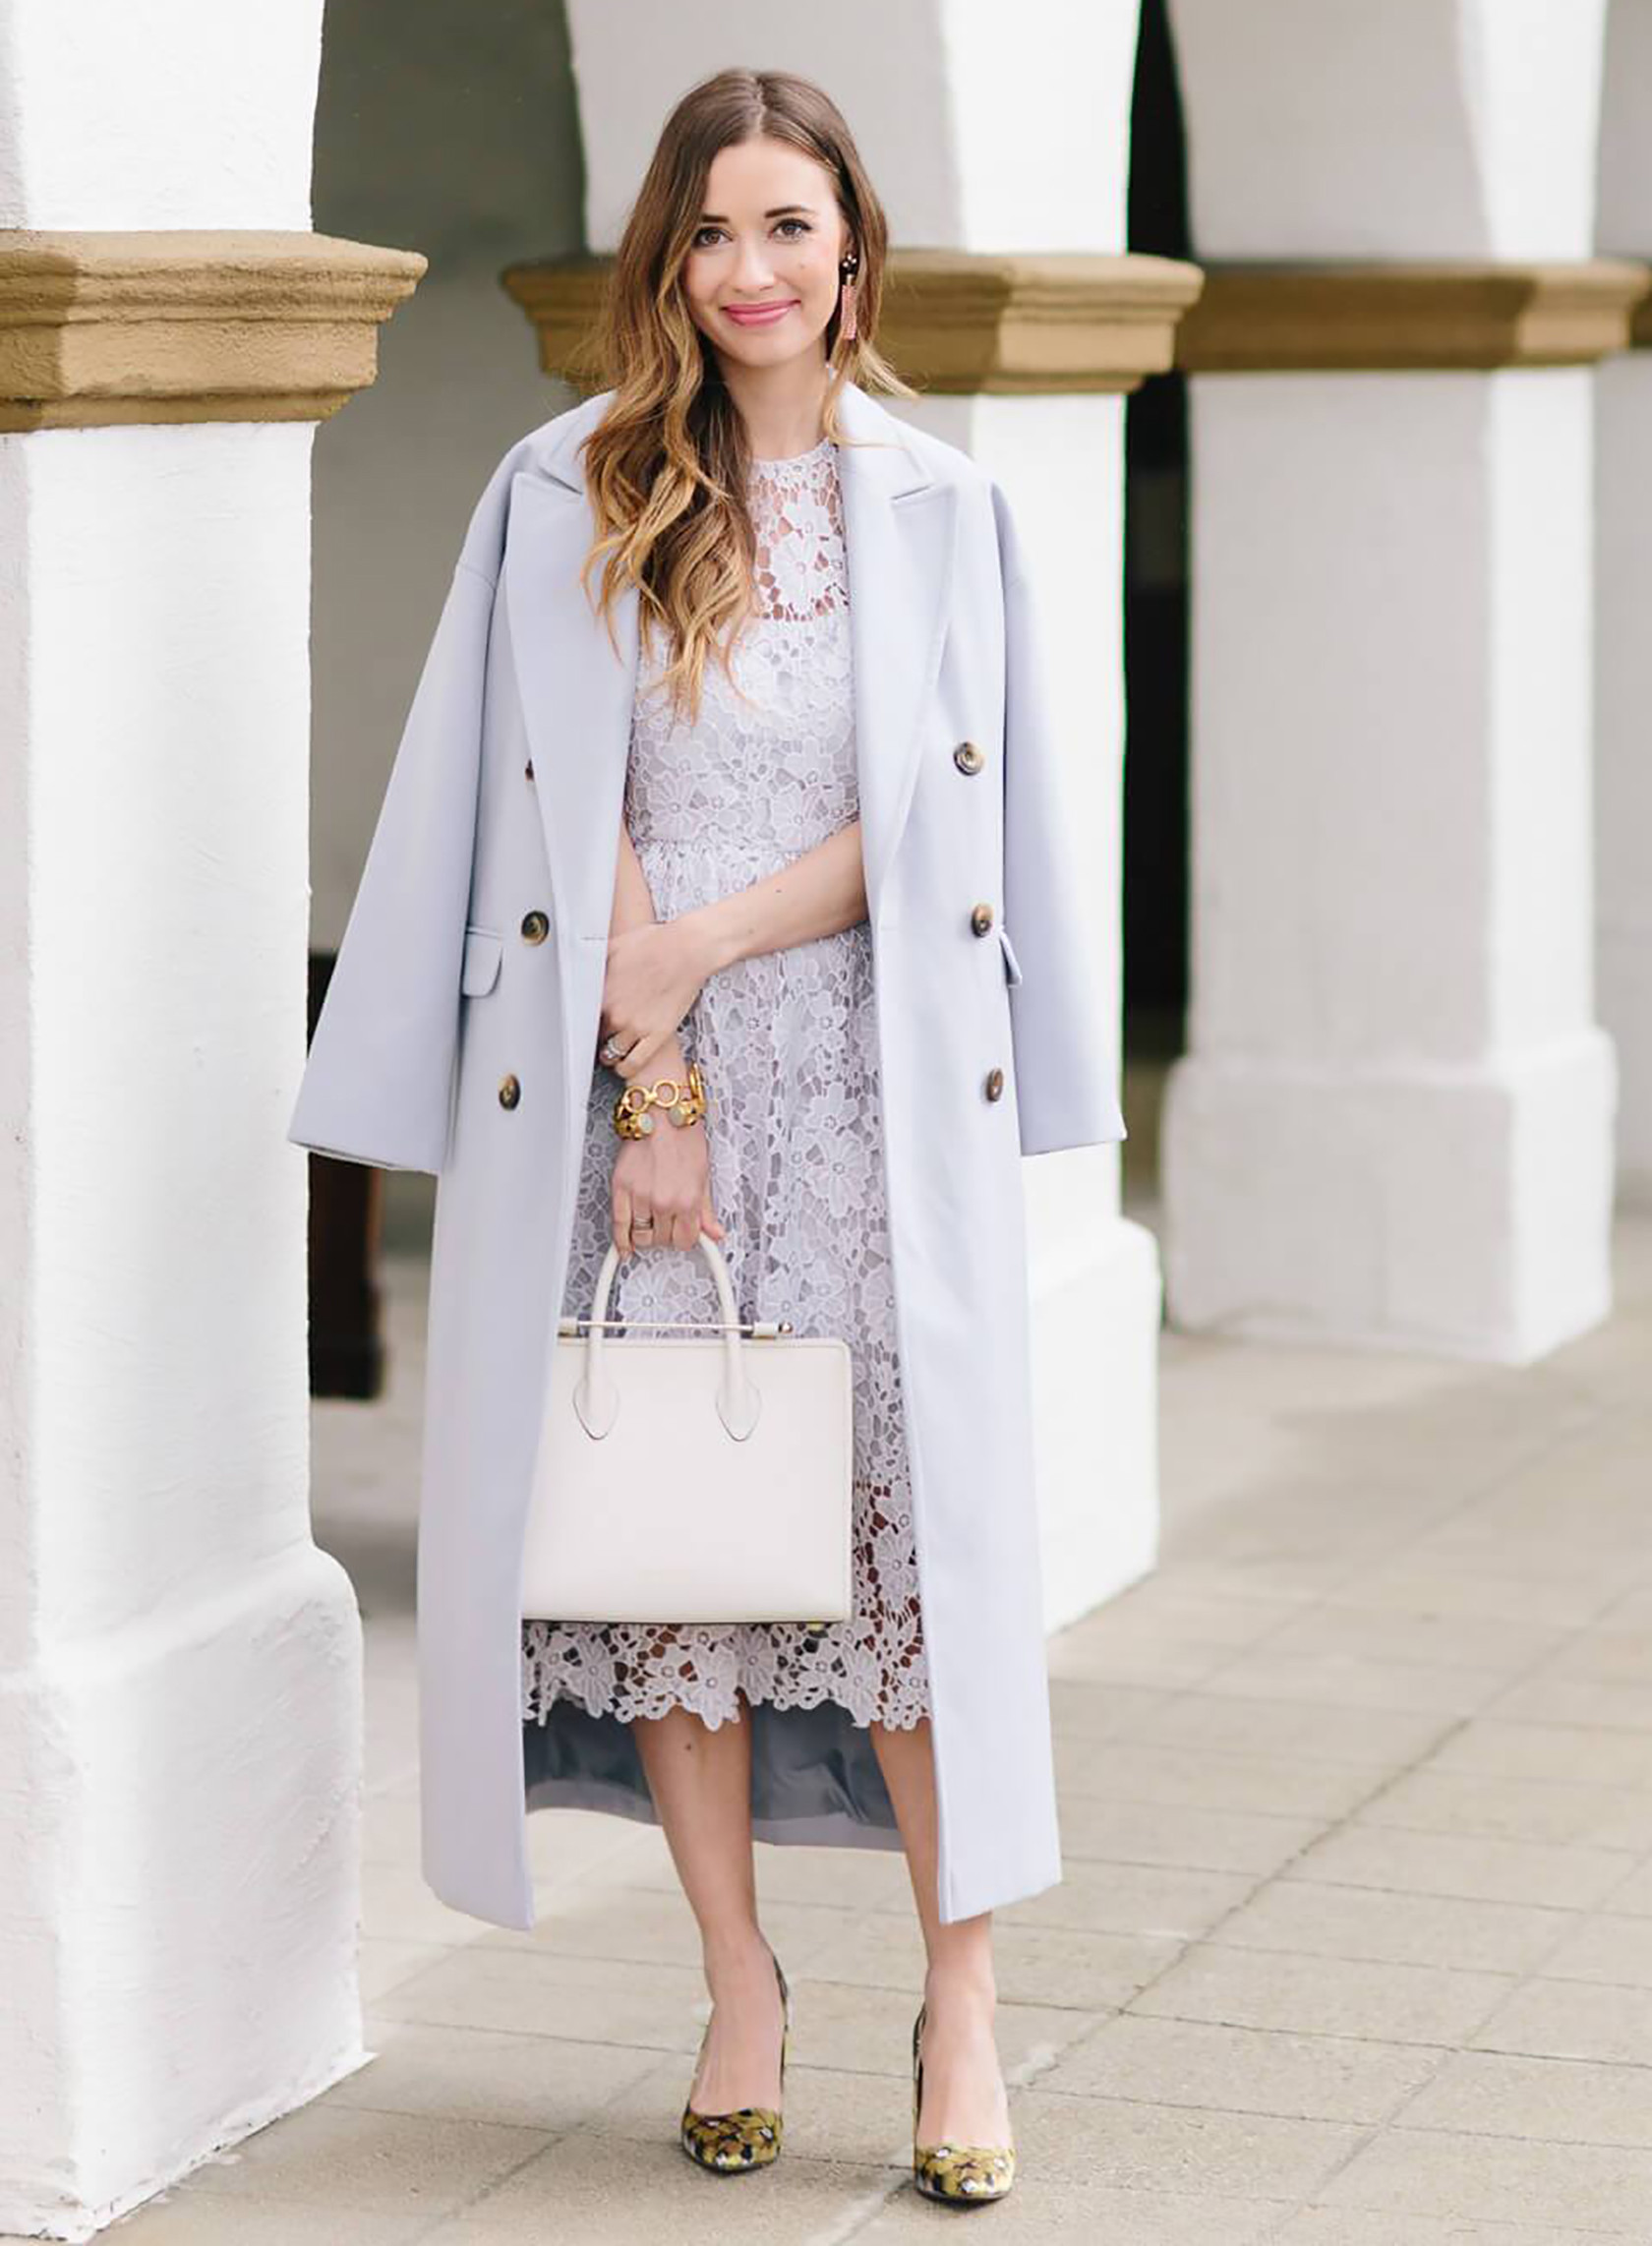 Easter Sunday Outfit Ideas
 Six Easter Sunday Outfit Ideas